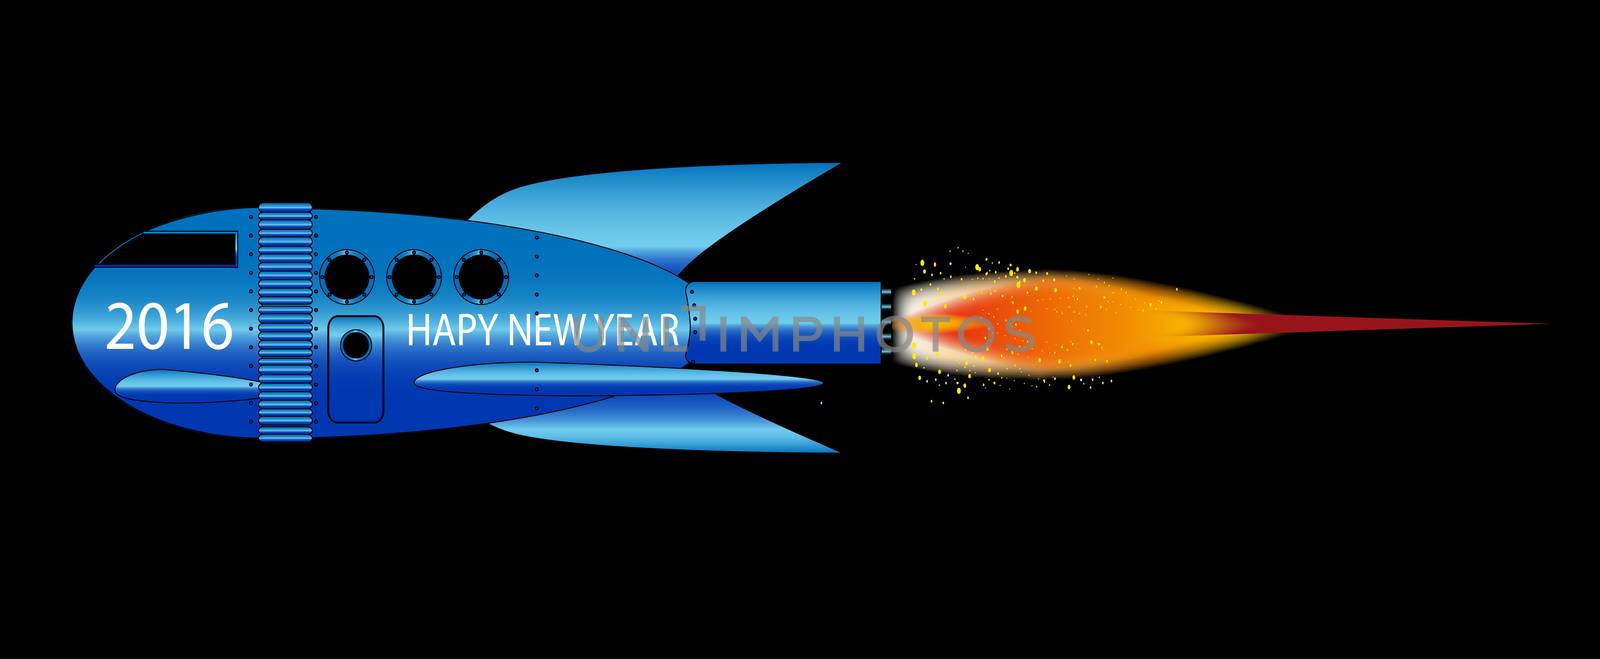 A cartoon space craft with a black background and the text 2016 Happy New Year